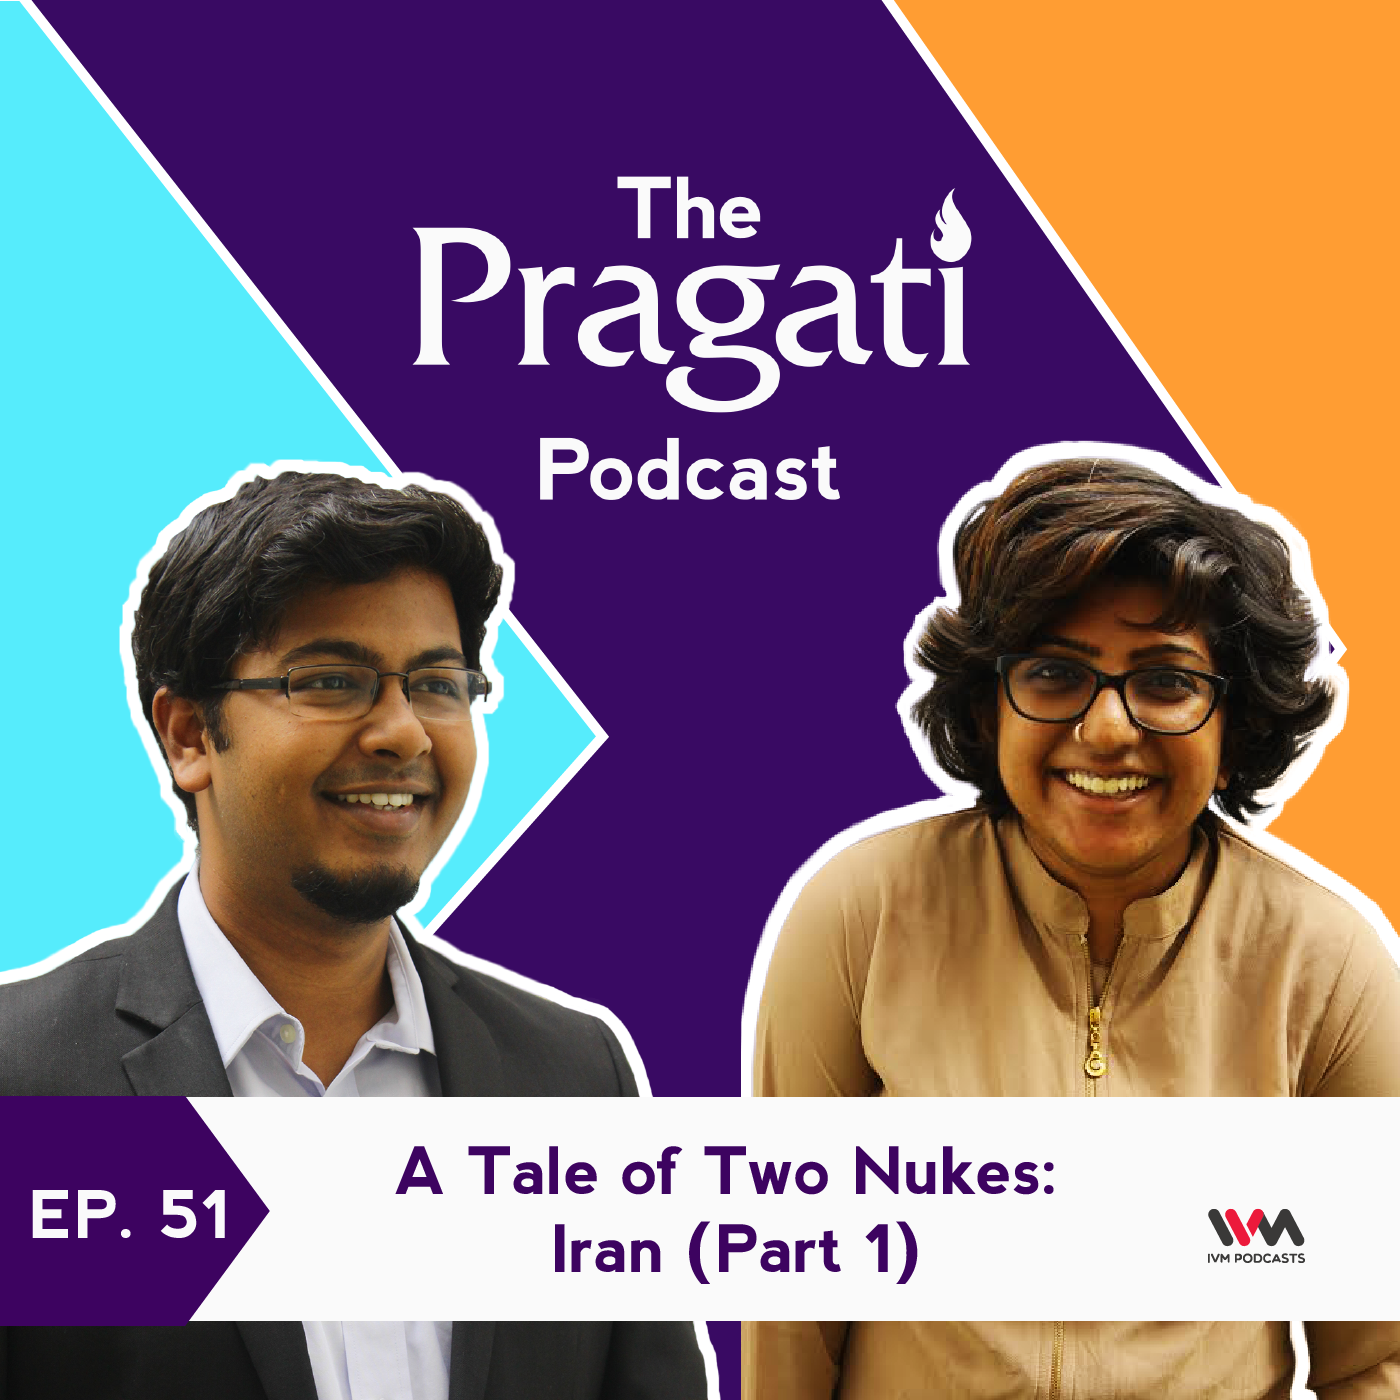 Ep. 51: A Tale of Two Nukes: Iran (Part 1)